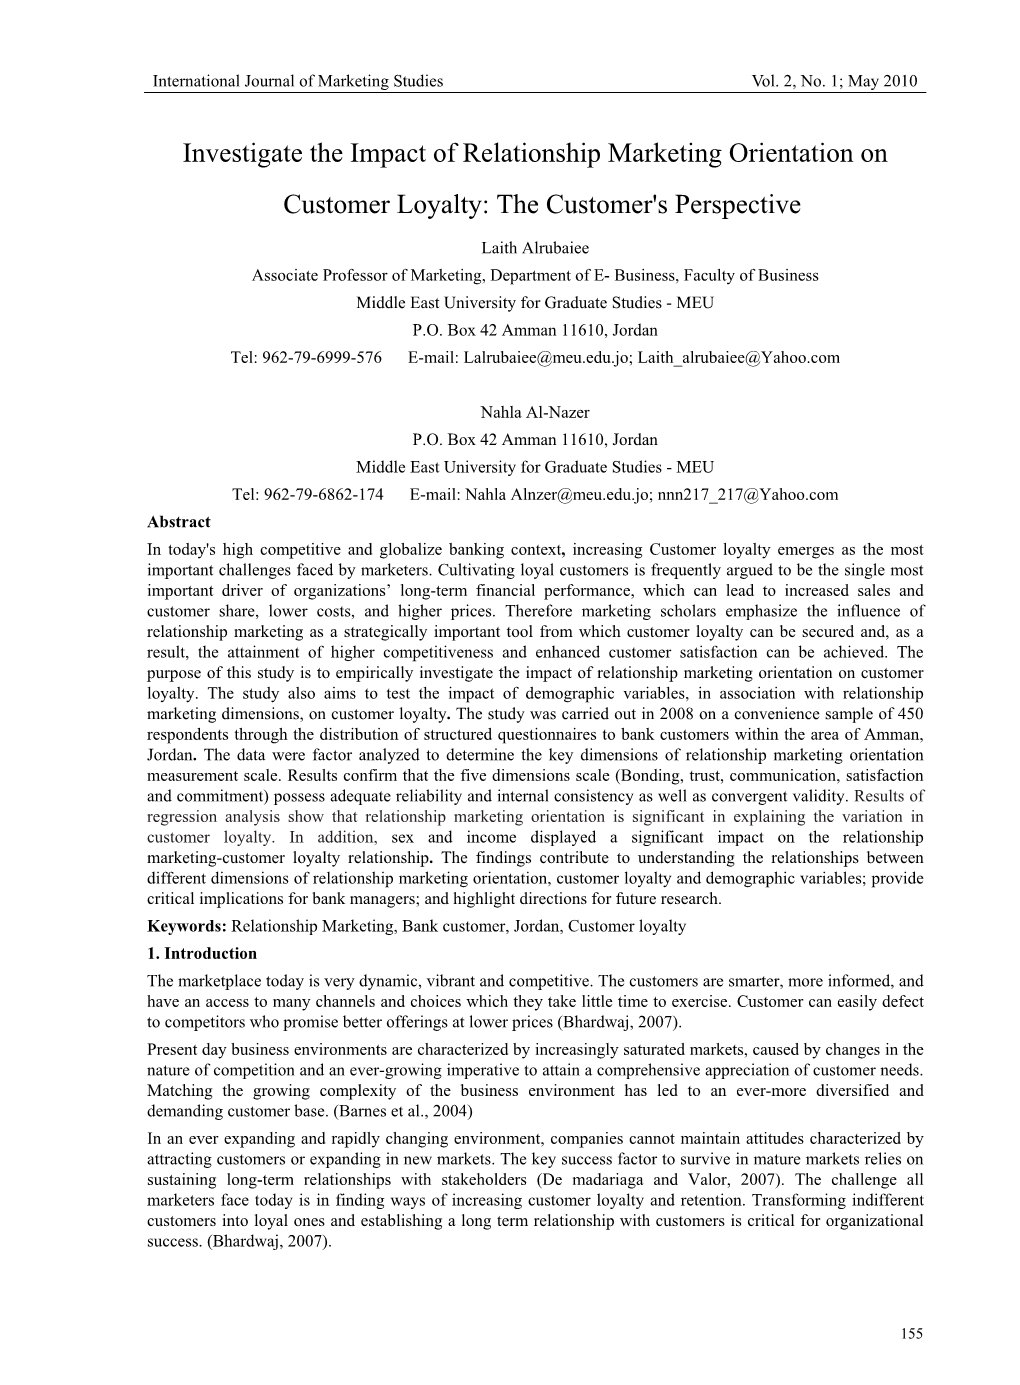 Investigate the Impact of Relationship Marketing Orientation on Customer Loyalty: the Customer's Perspective